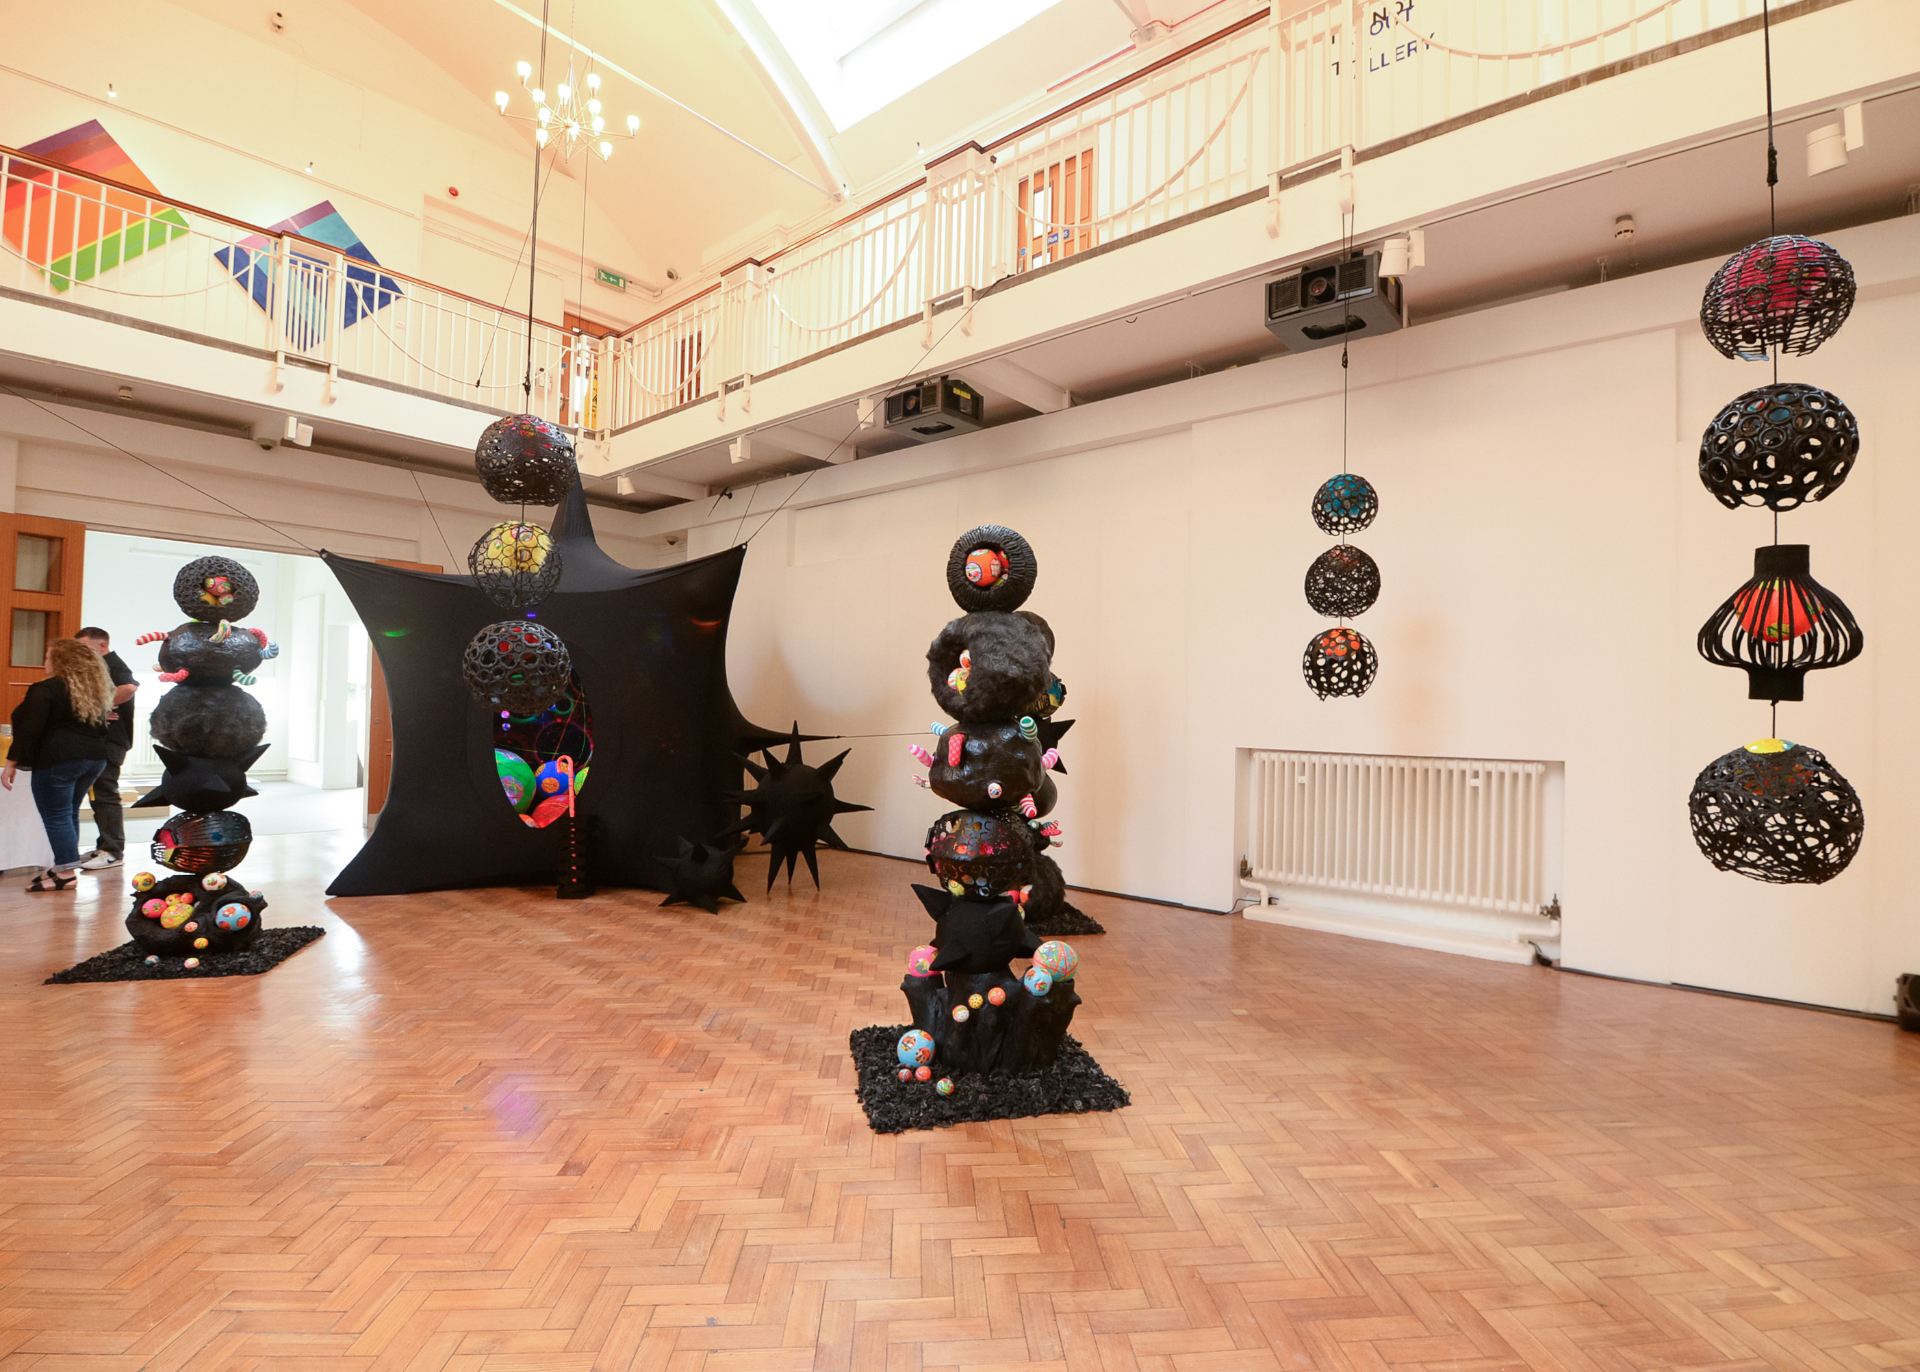 Black and spikey tent with ball-and-spike sculptures in gallery